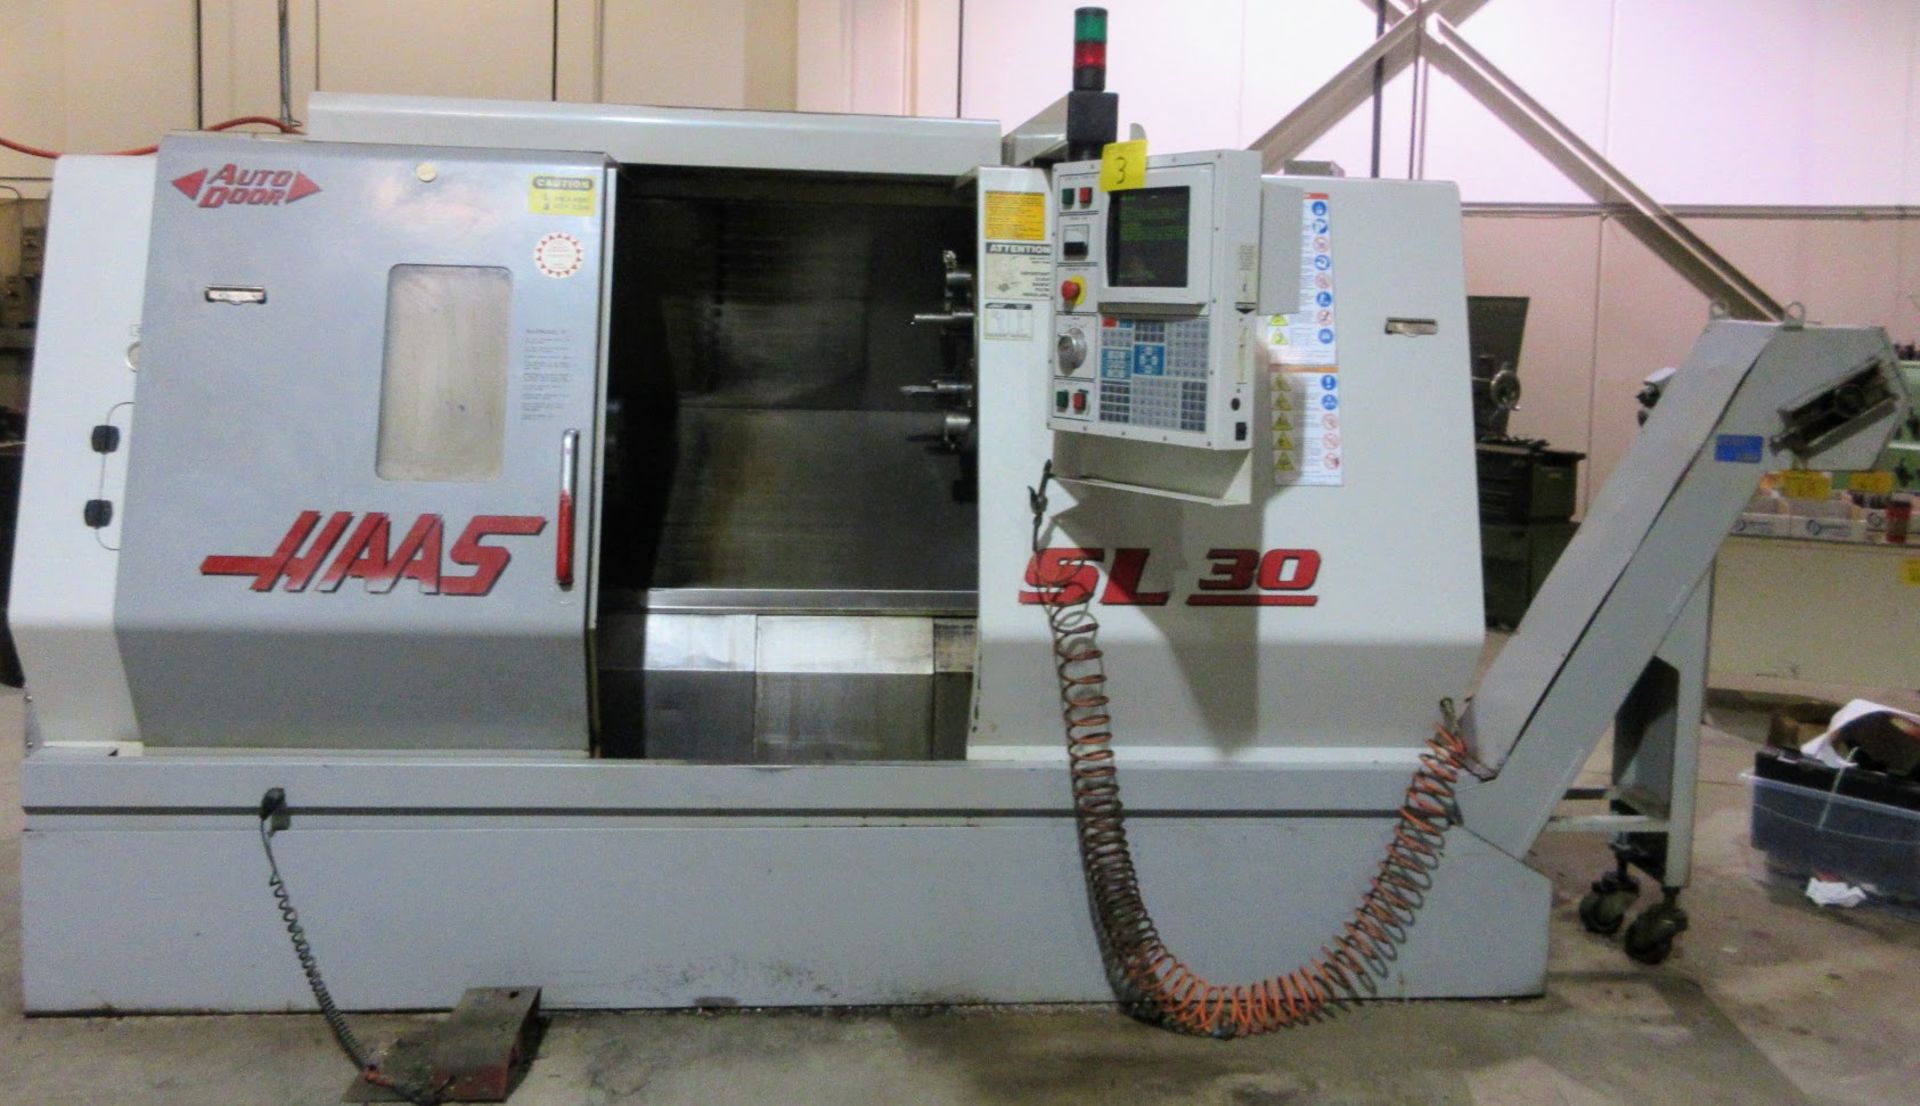 2000 HAAS SL-30T CNC LATHE, S/N 62806, CNC CONTROL, 10” 3-JAW CHUCK, TOOL PRESETTER, 12-STATION - Image 15 of 23